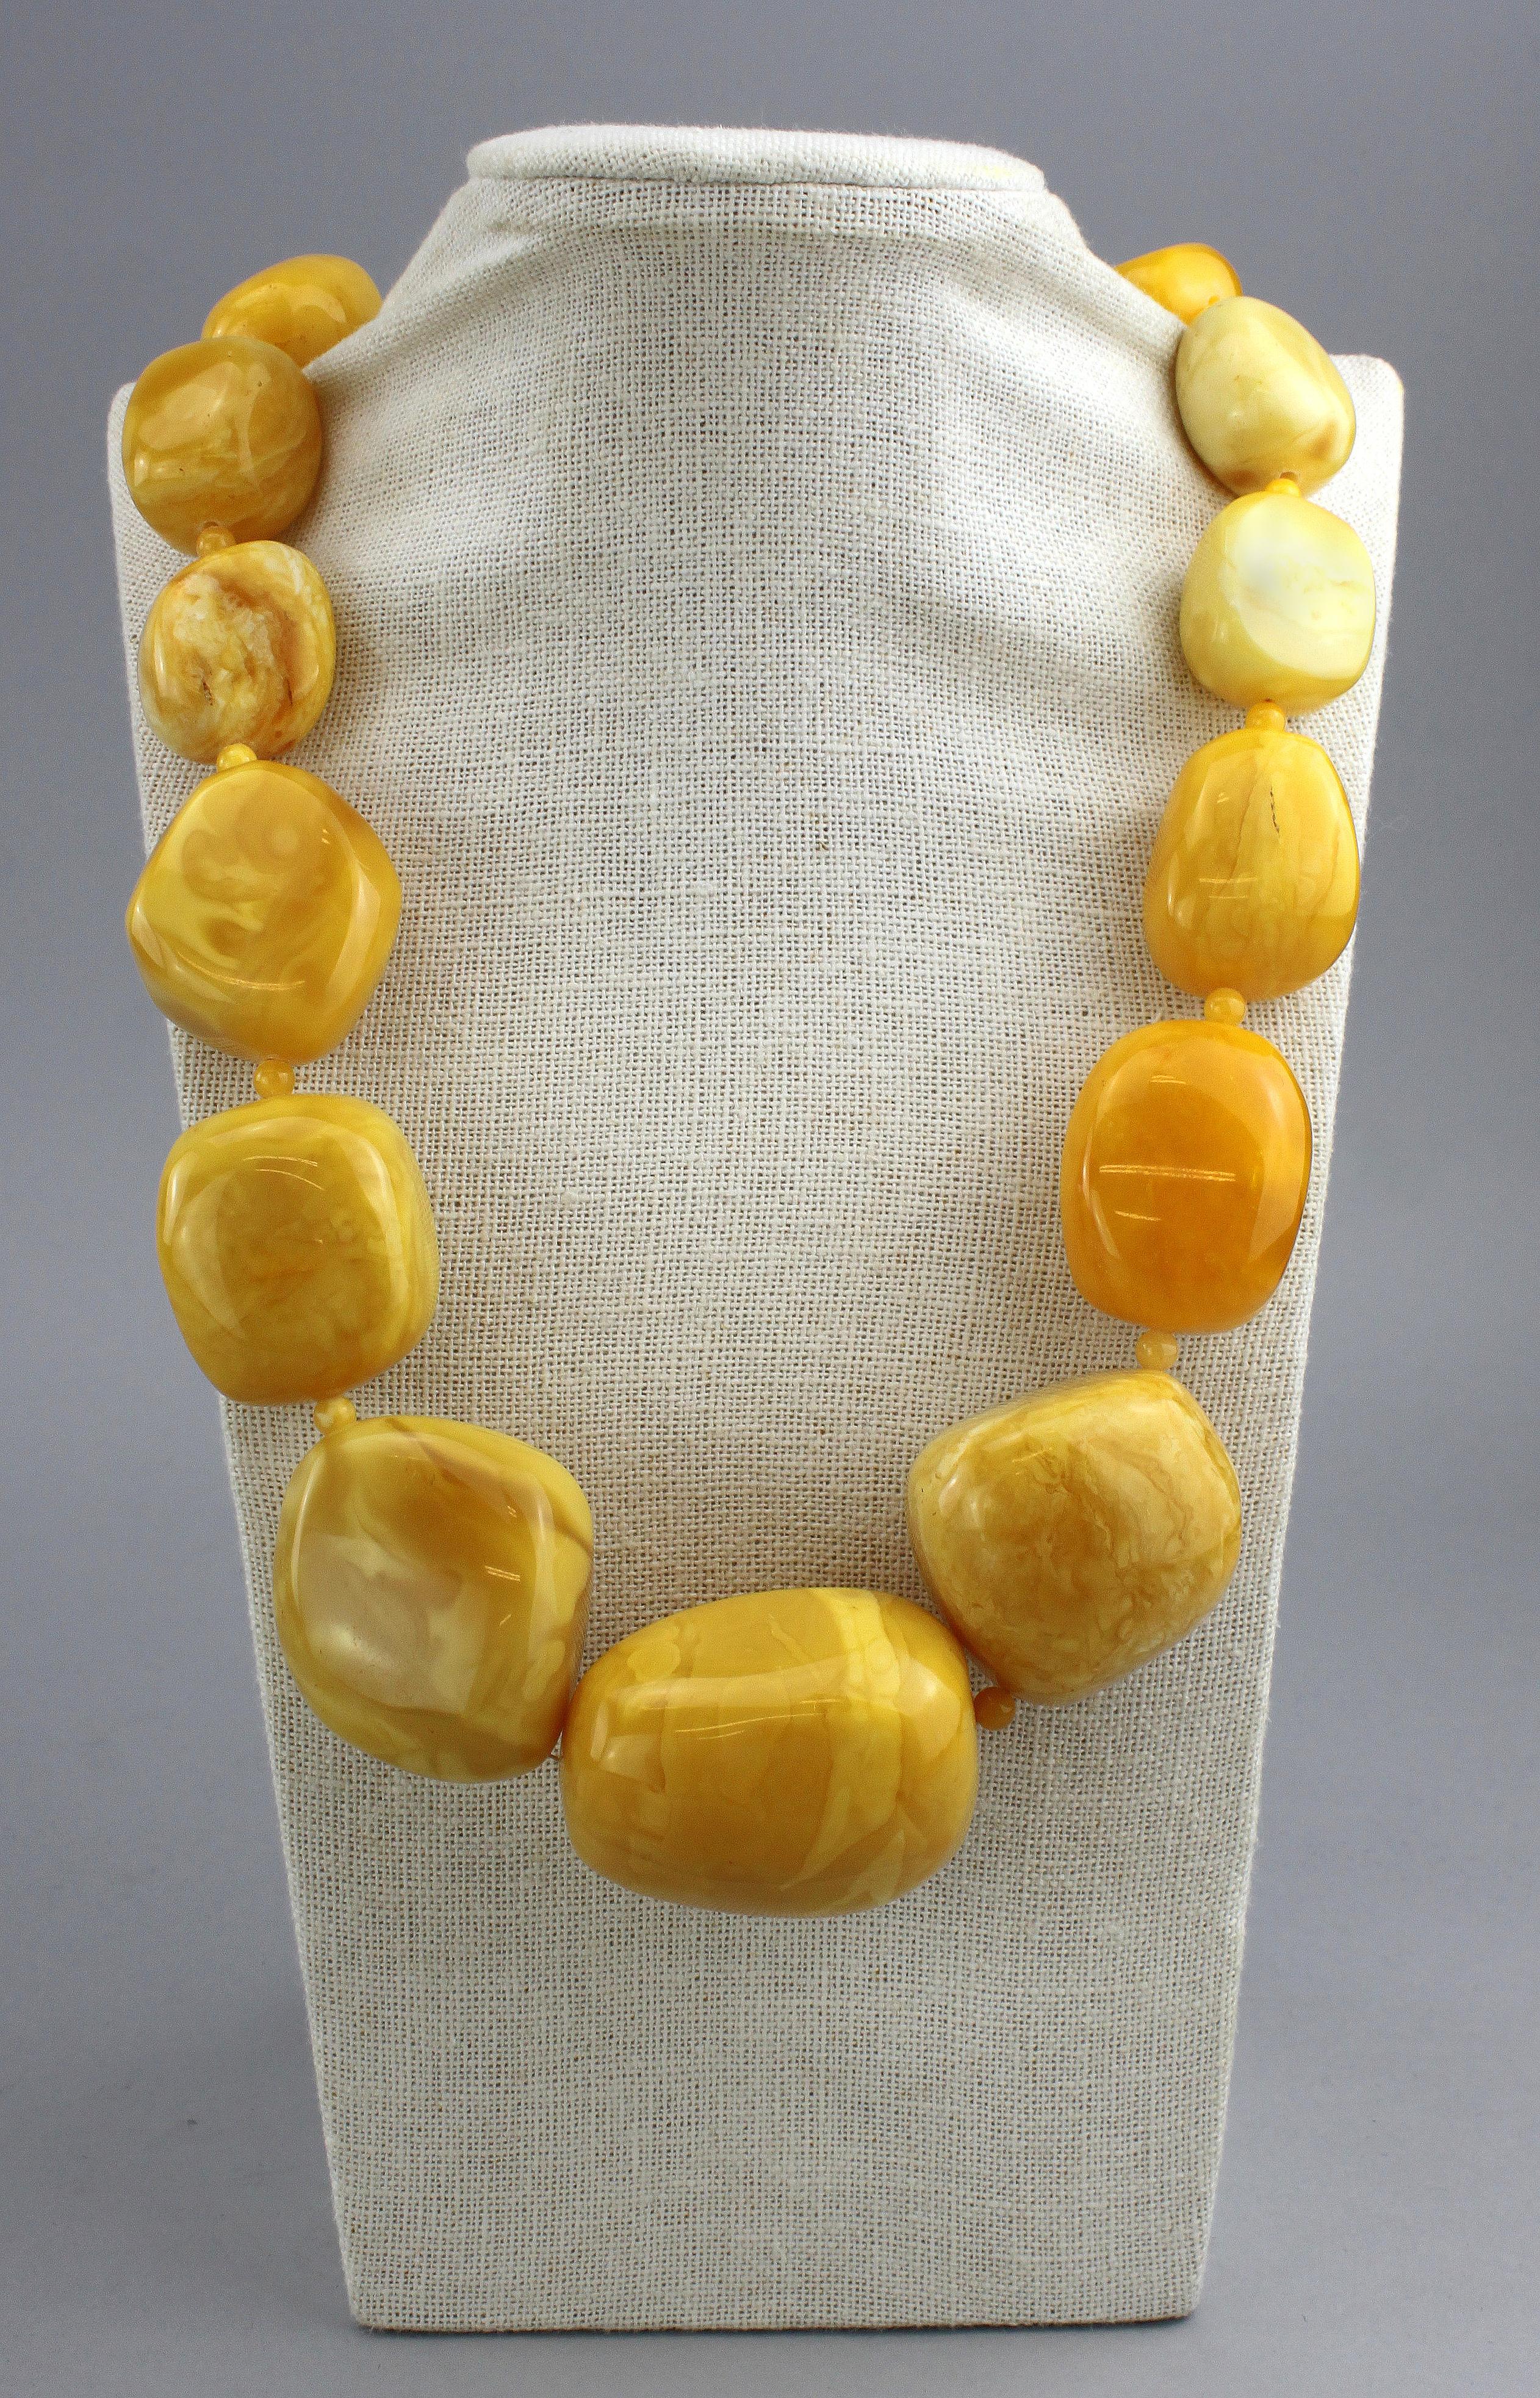 Large natural Baltic white amber necklace.
Circa 1950's

Dimensions -
Length : 65.5 cm
Width : 4.3 cm
Weight : 239 grams

Amber - 
Treatment : Natural
Large Amber Stone Size : 4.8 x 4.2 x 3.2 cm
Medium Stone Size : 4.5 x 4 x 3 cm

Condition: